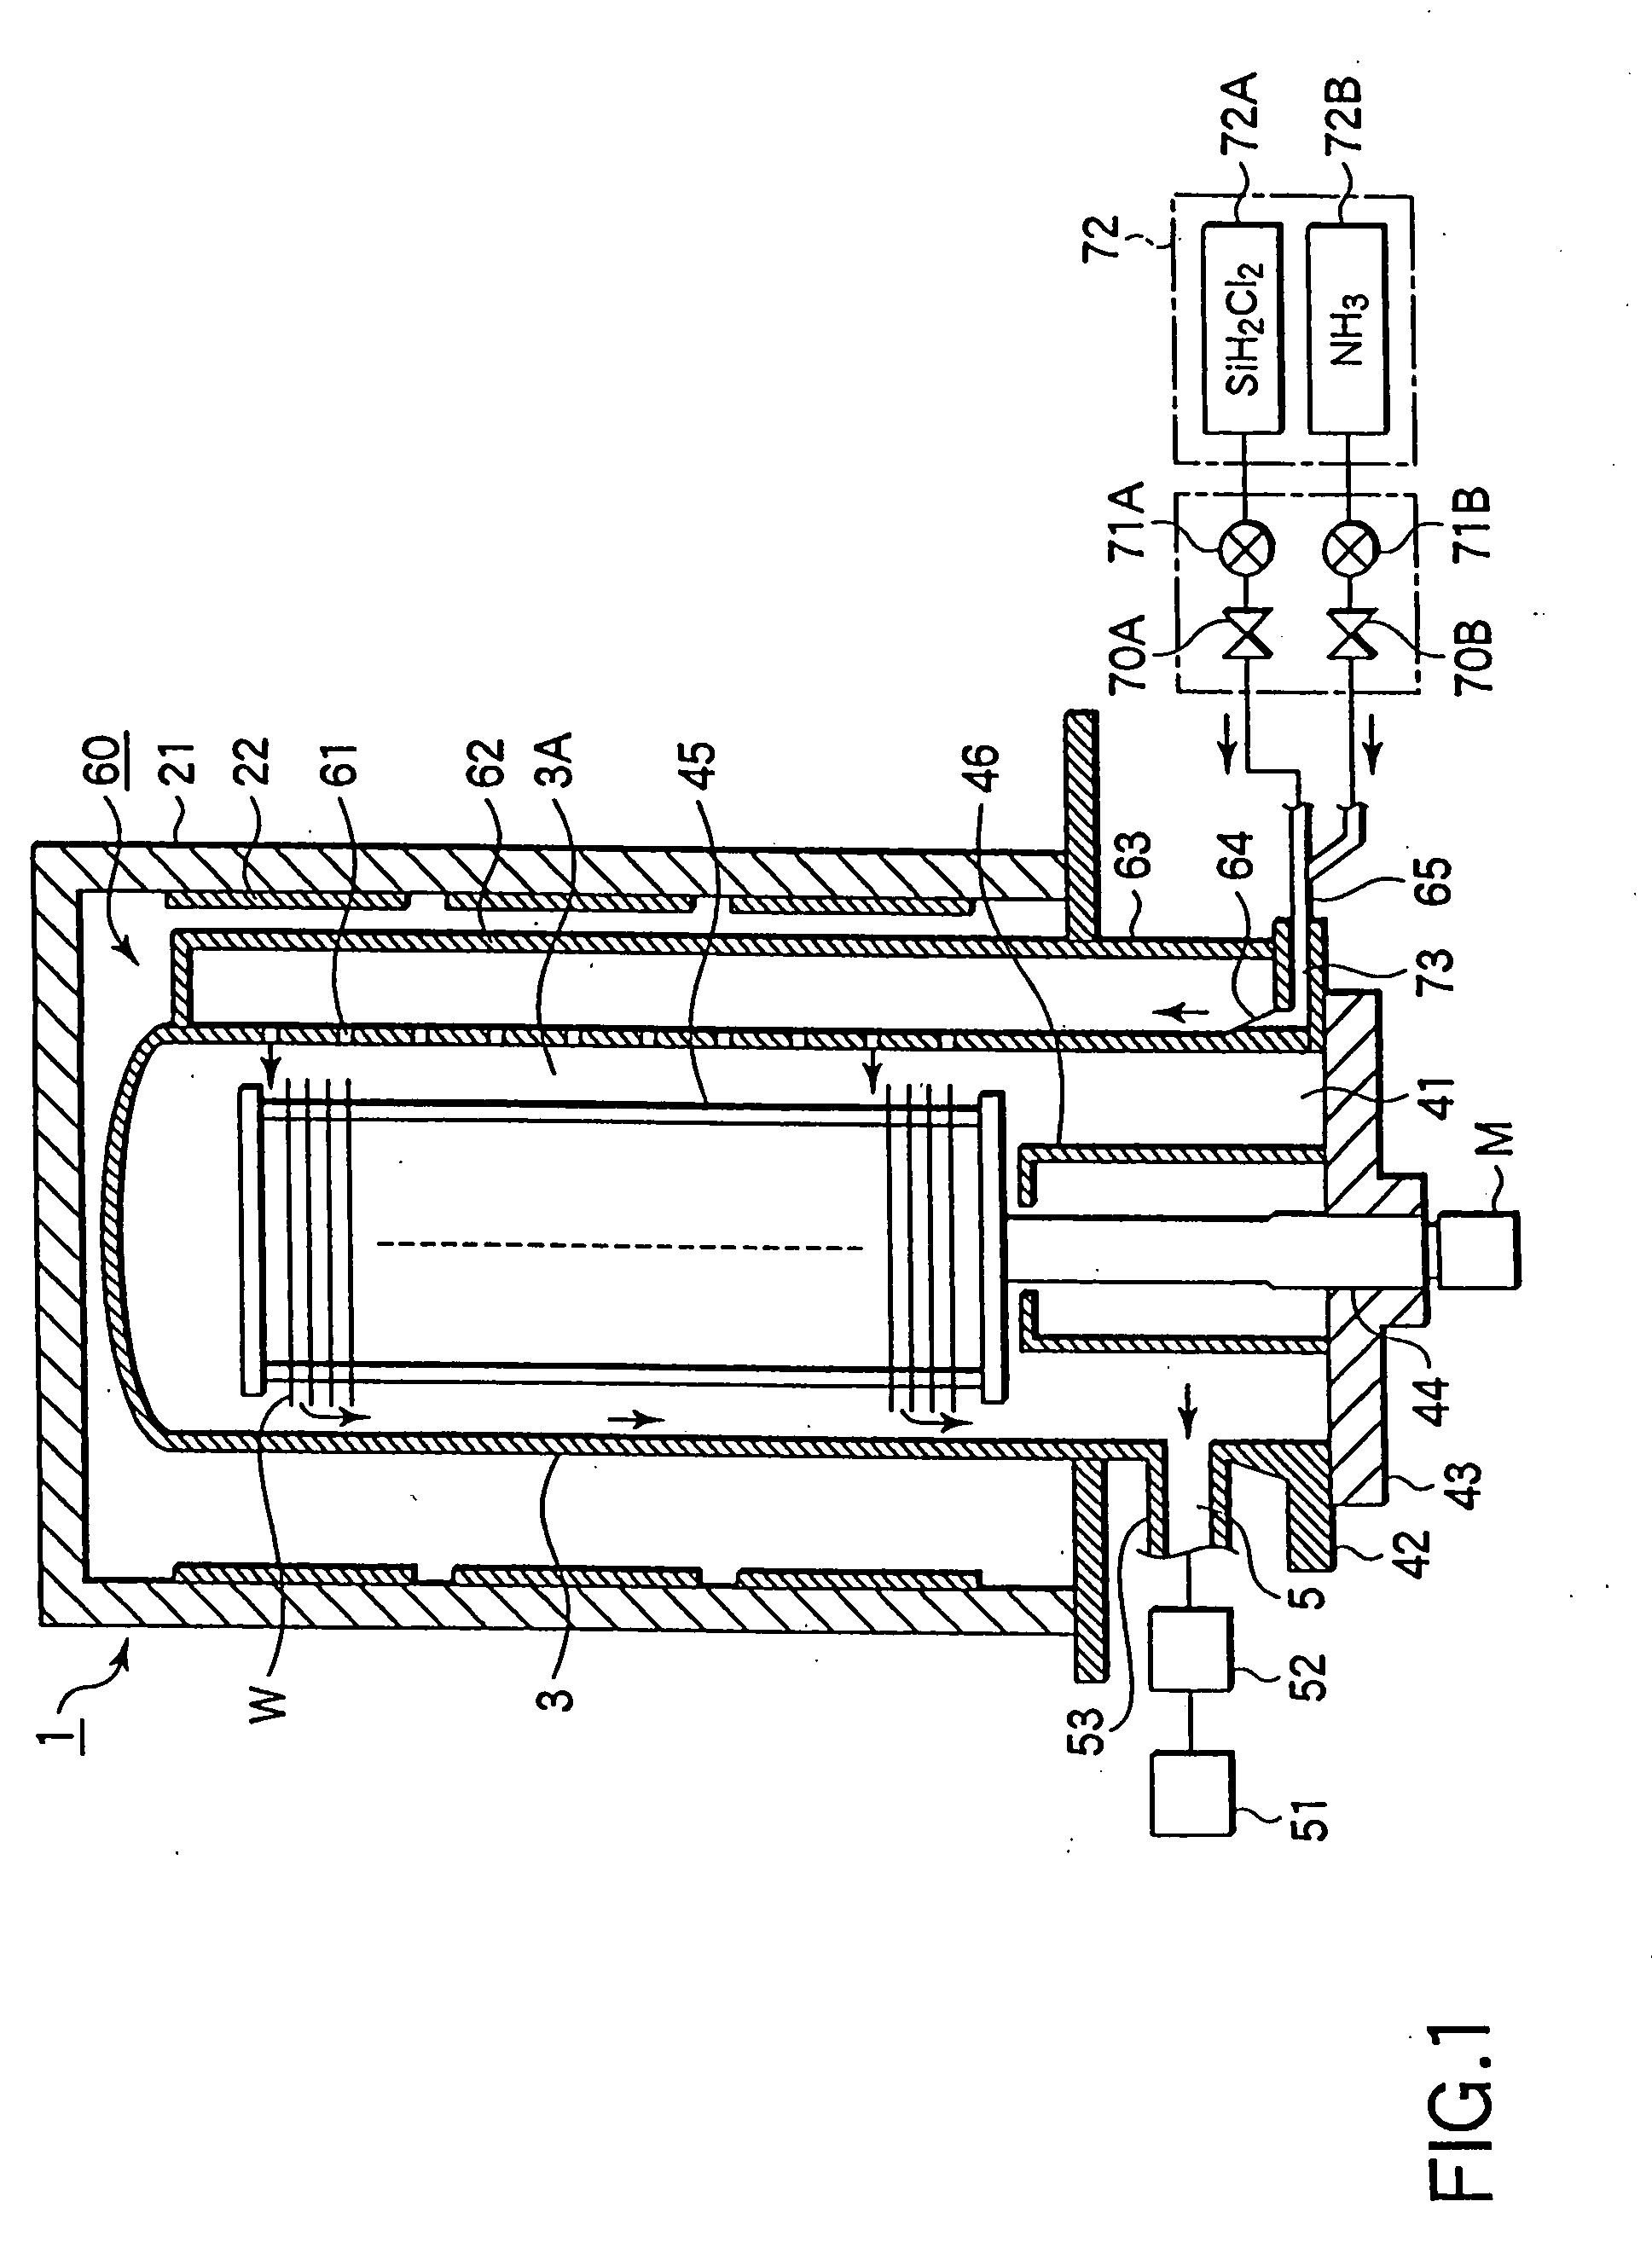 Heat processing apparatus for semiconductor process